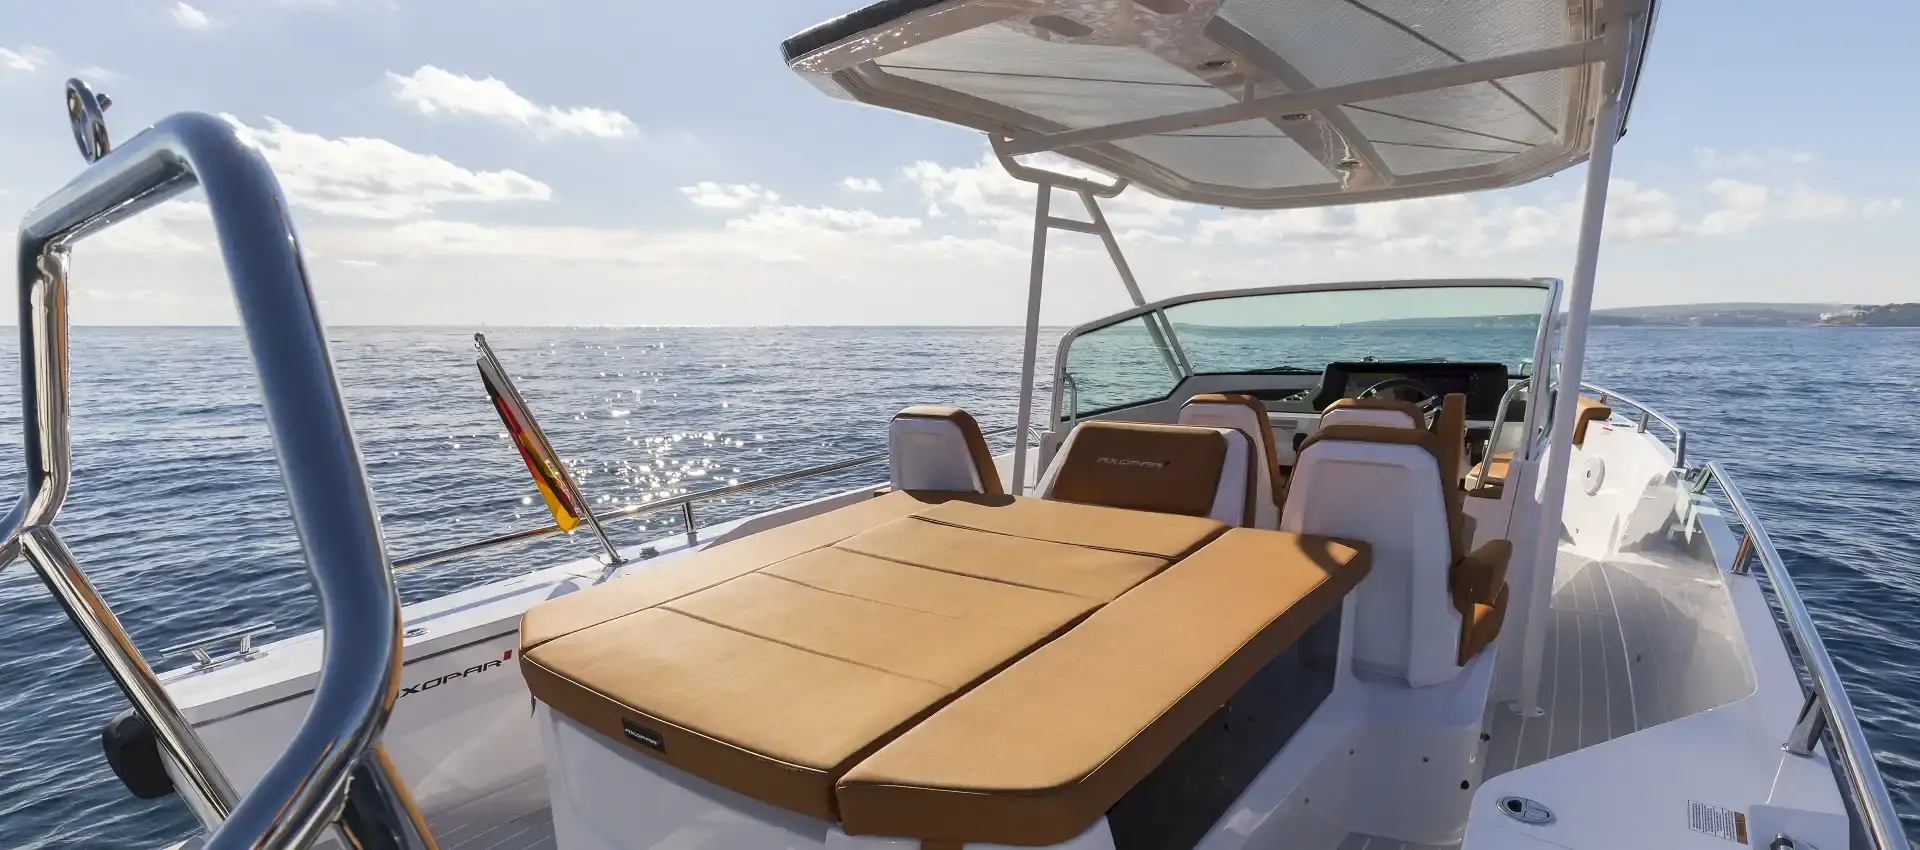 Cruise In Style With The Split Taxi Boat Axopar 28 T-top